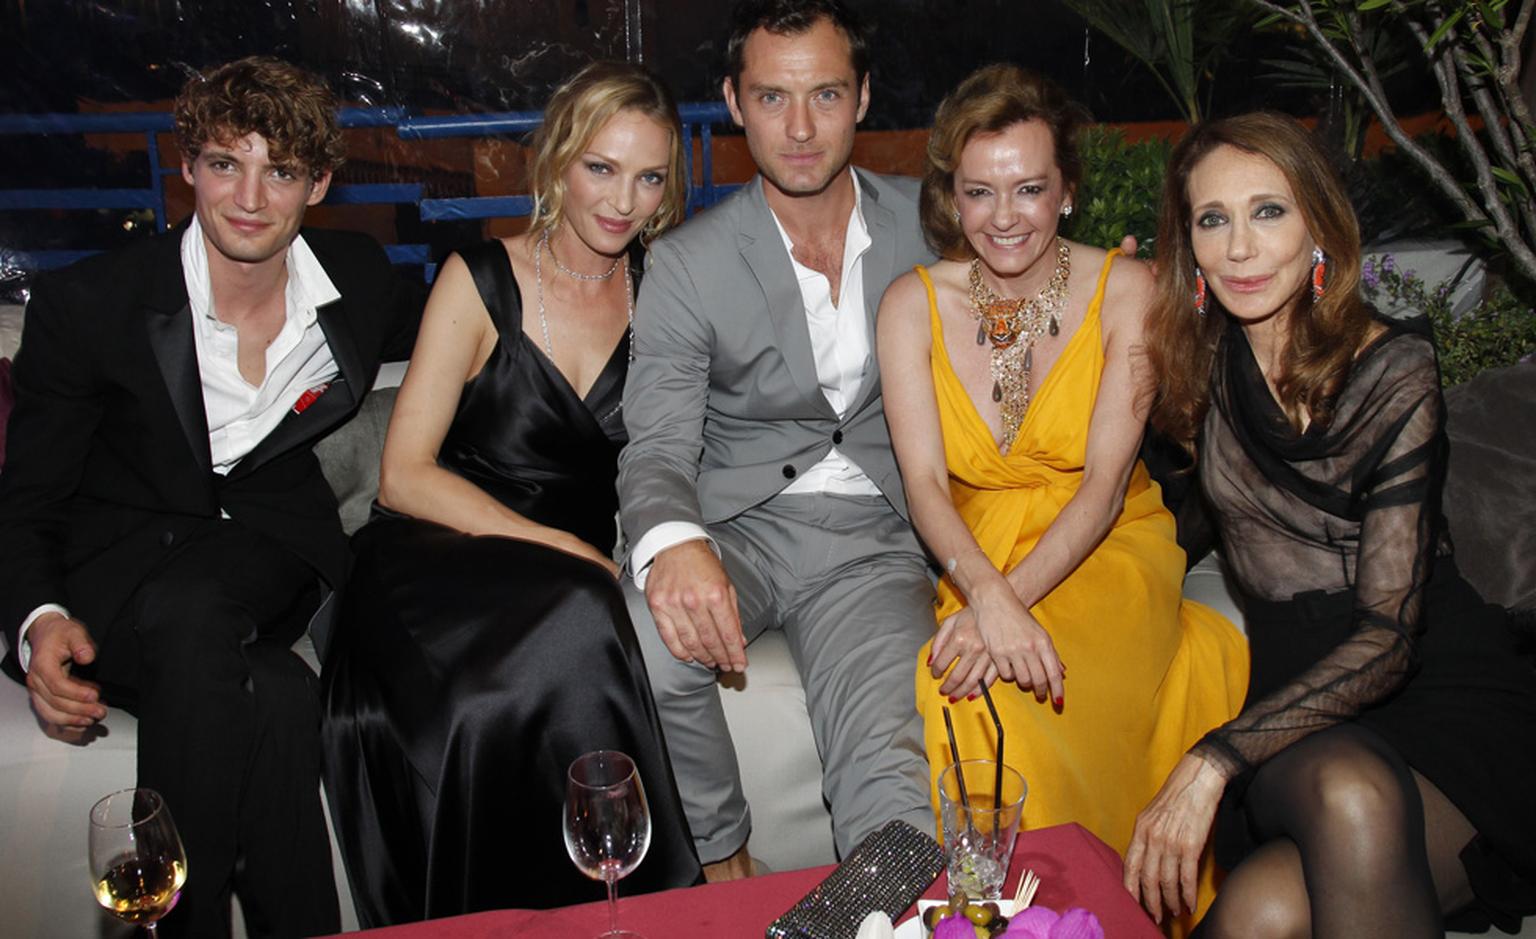 After the Trophée Chopard awards ceremony, the guests relax. From left to right, Trophée winnner Niels Schneider for his role in Heartbeats, Uma Thurman, Jude Law, Co-President of Chopard Caroline Gruosi-Scheufele and Marisa Berenson